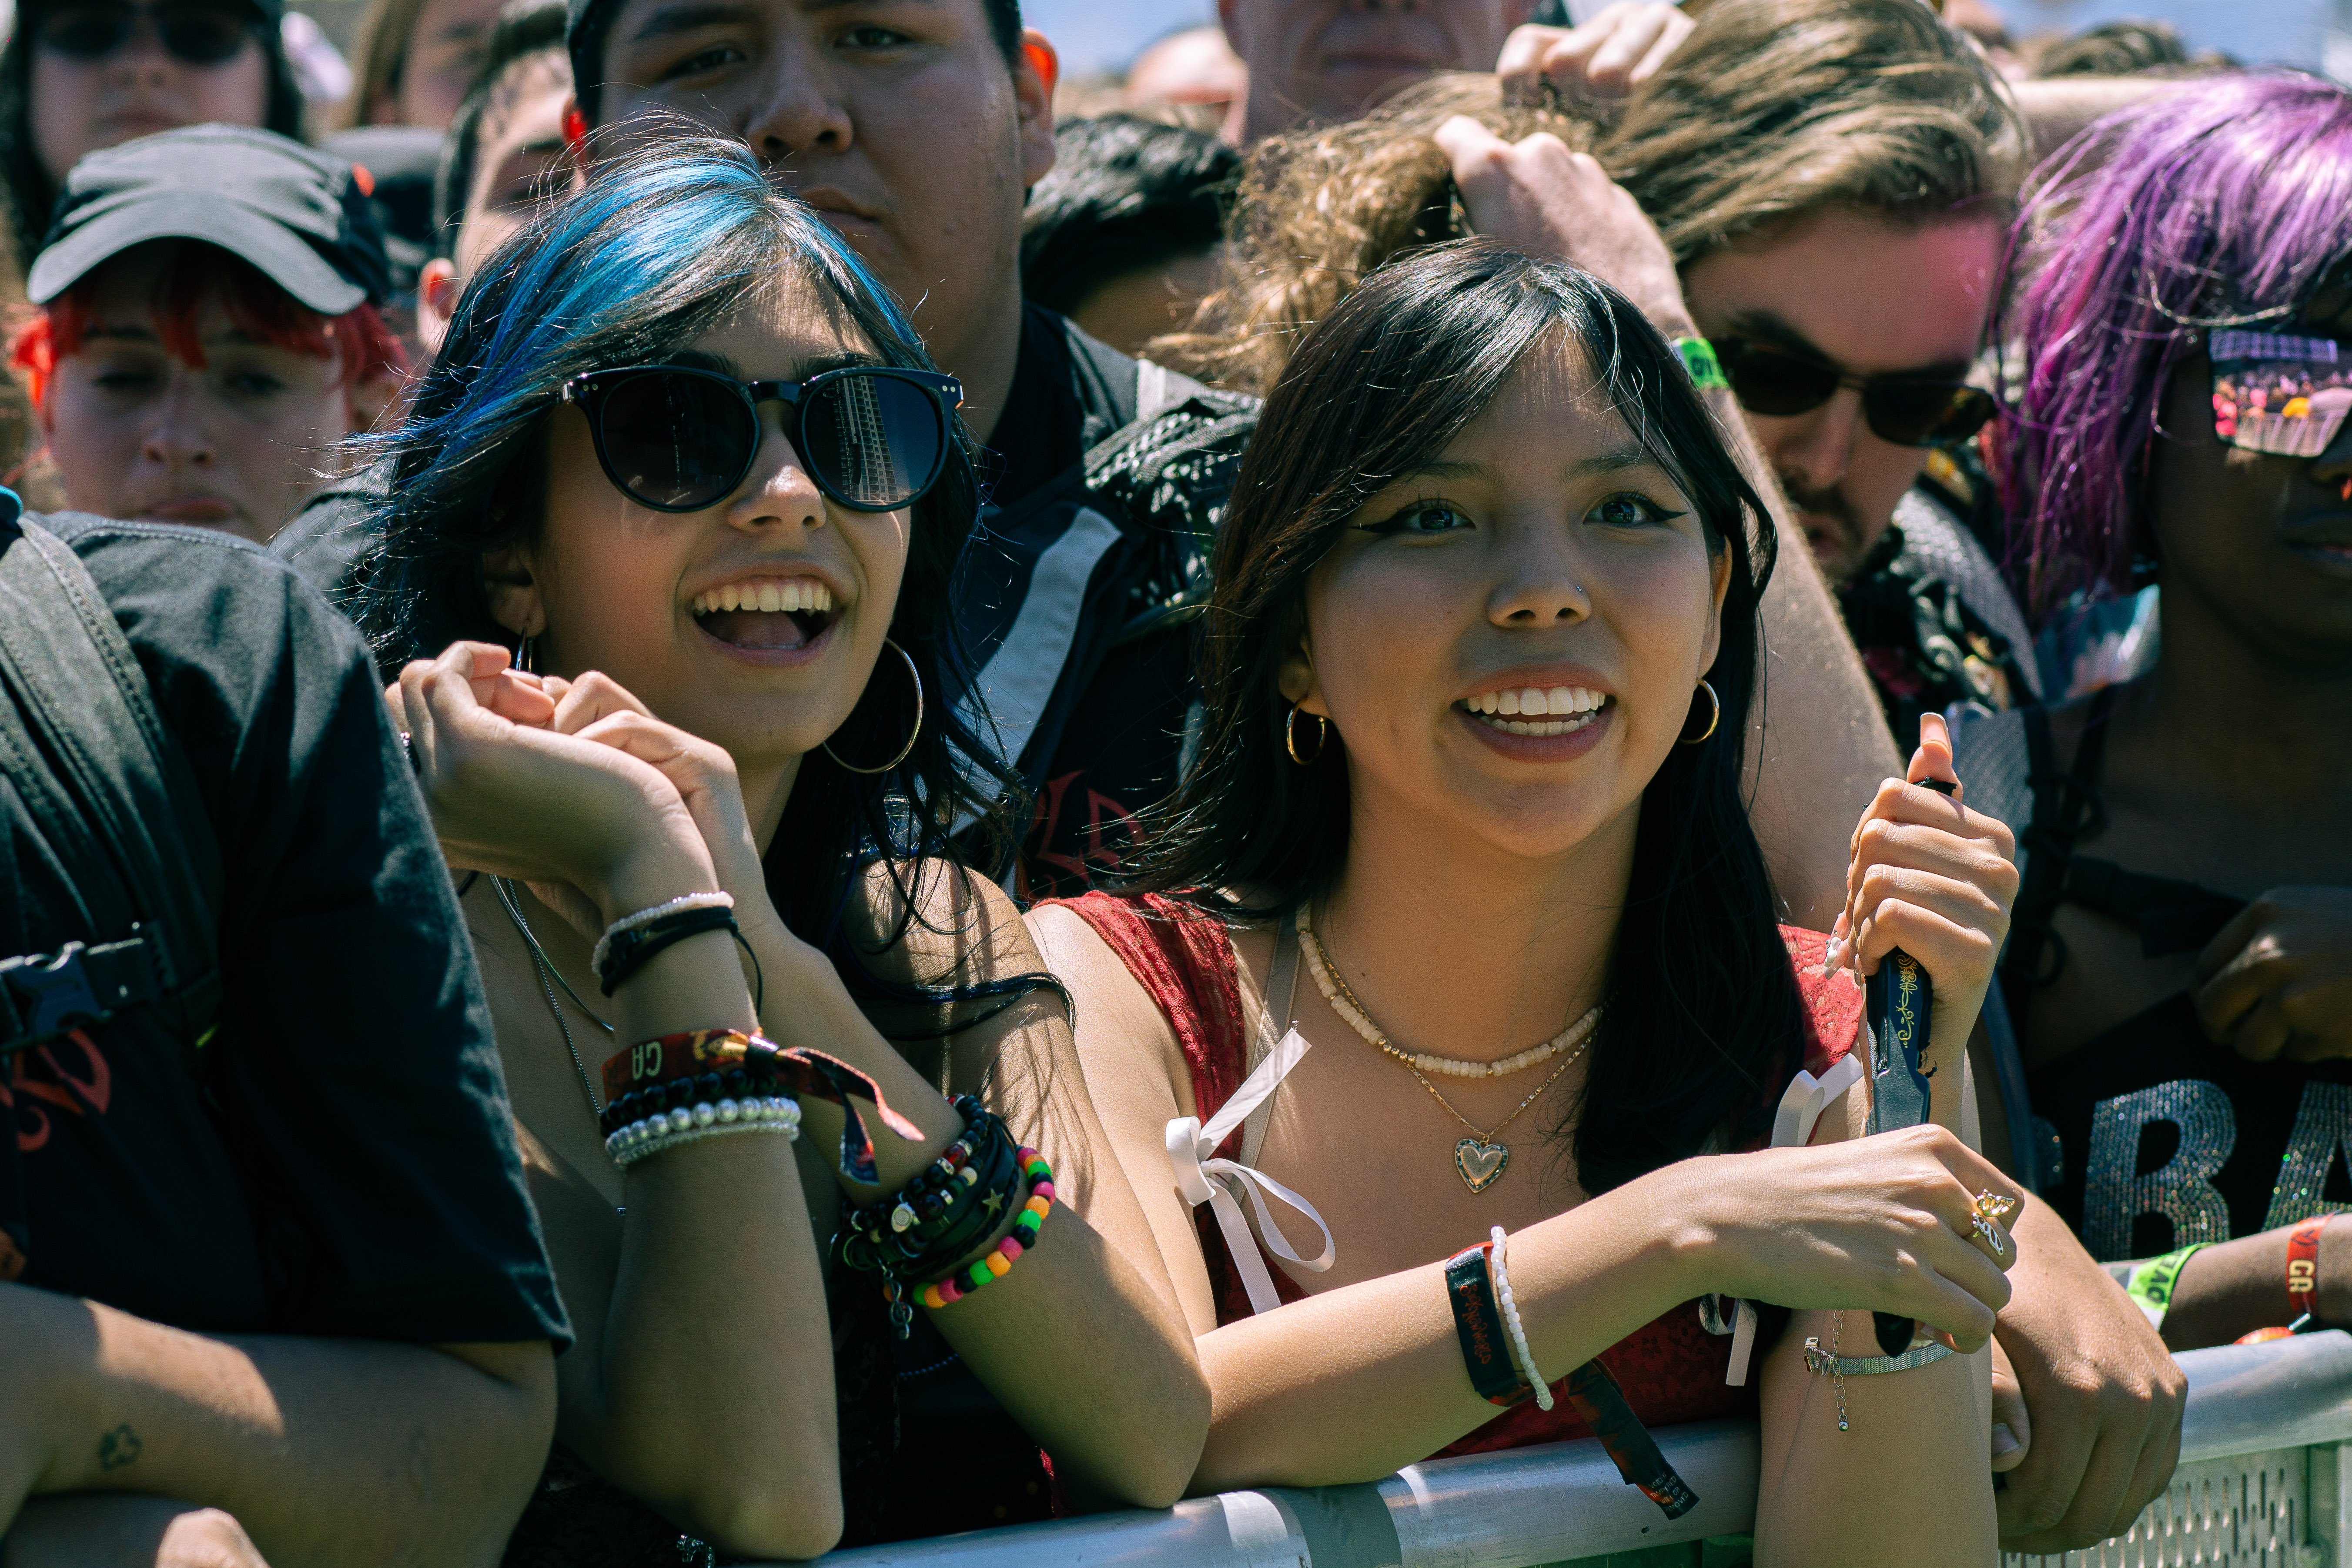 Two girls in the crowd enjoying themselves 